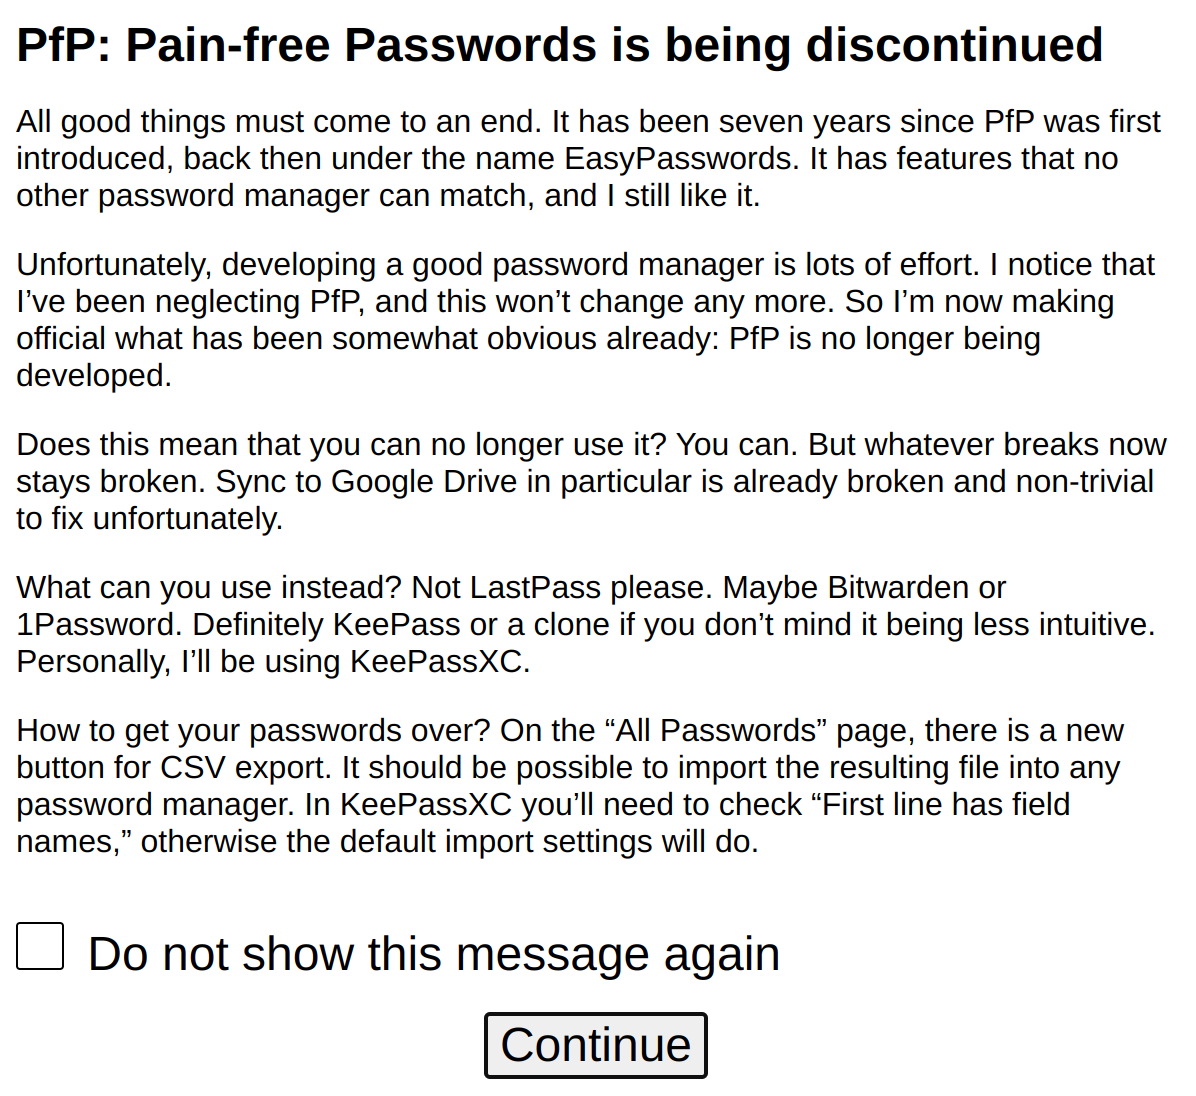 Screenshot of a message titled “PfP: Pain-free Passwords is being discontinued.” The text says: “All good things must come to an end. It has been seven years since PfP was first introduced, back then under the name EasyPasswords. It has features that no other password manager can match, and I still like it. Unfortunately, developing a good password manager is lots of effort. I notice that I’ve been neglecting PfP, and this won’t change any more. So I’m now making official what has been somewhat obvious already: PfP is no longer being developed. Does this mean that you can no longer use it? You can. But whatever breaks now stays broken. Sync to Google Drive in particular is already broken and non-trivial to fix unfortunately. What can you use instead? Not LastPass please. Maybe Bitwarden or 1Password. Definitely KeePass or a clone if you don’t mind it being less intuitive. Personally, I’ll be using KeePassXC. How to get your passwords over? On the “All Passwords” page, there is a new button for CSV export. It should be possible to import the resulting file into any password manager. In KeePassXC you’ll need to check “First line has field names,” otherwise the default import settings will do.”